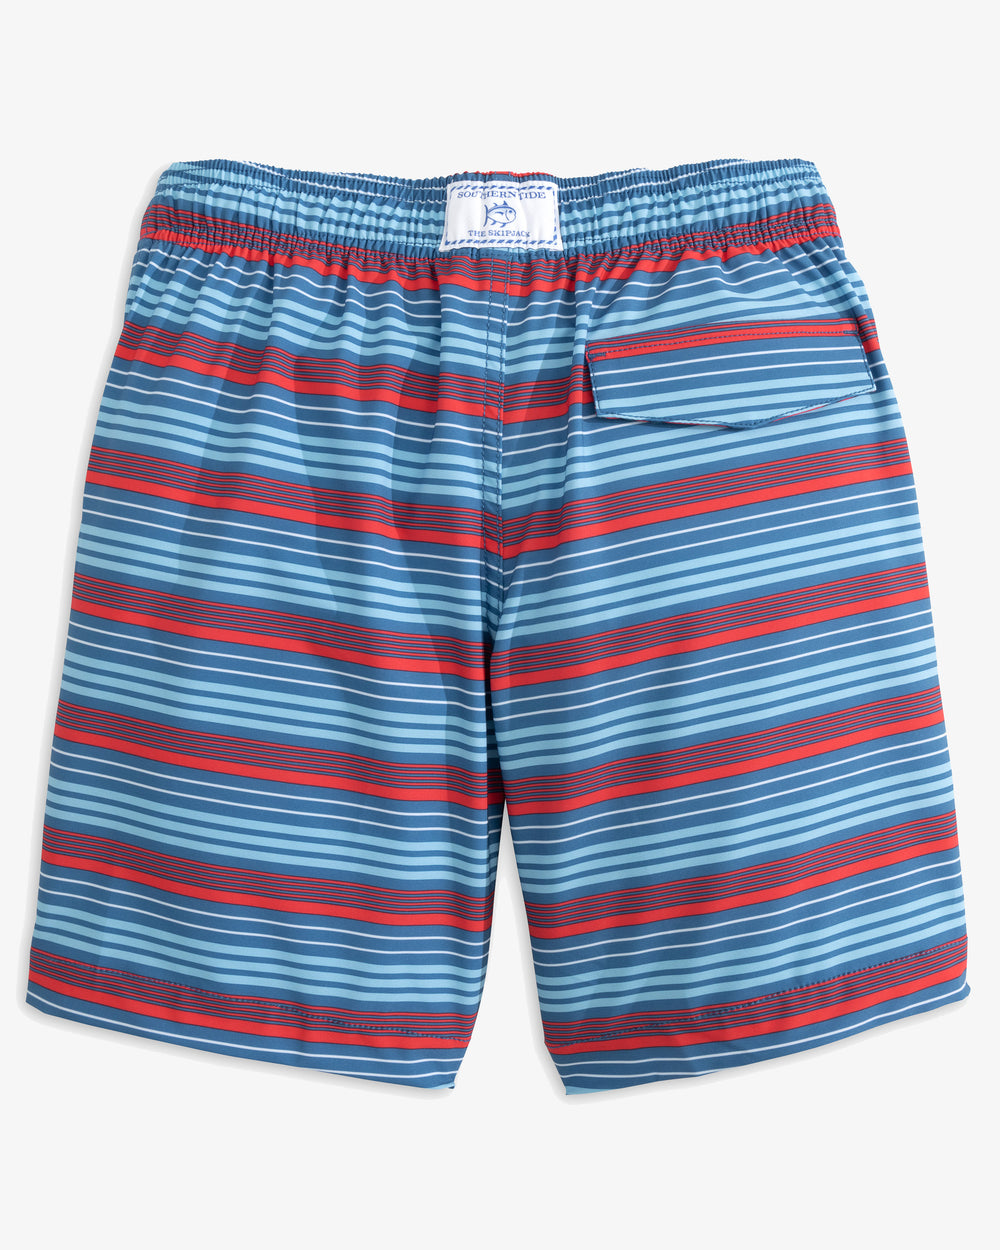 The back view of the Boys Largo Stripe Swim Trunk by Southern Tide - Deep Water